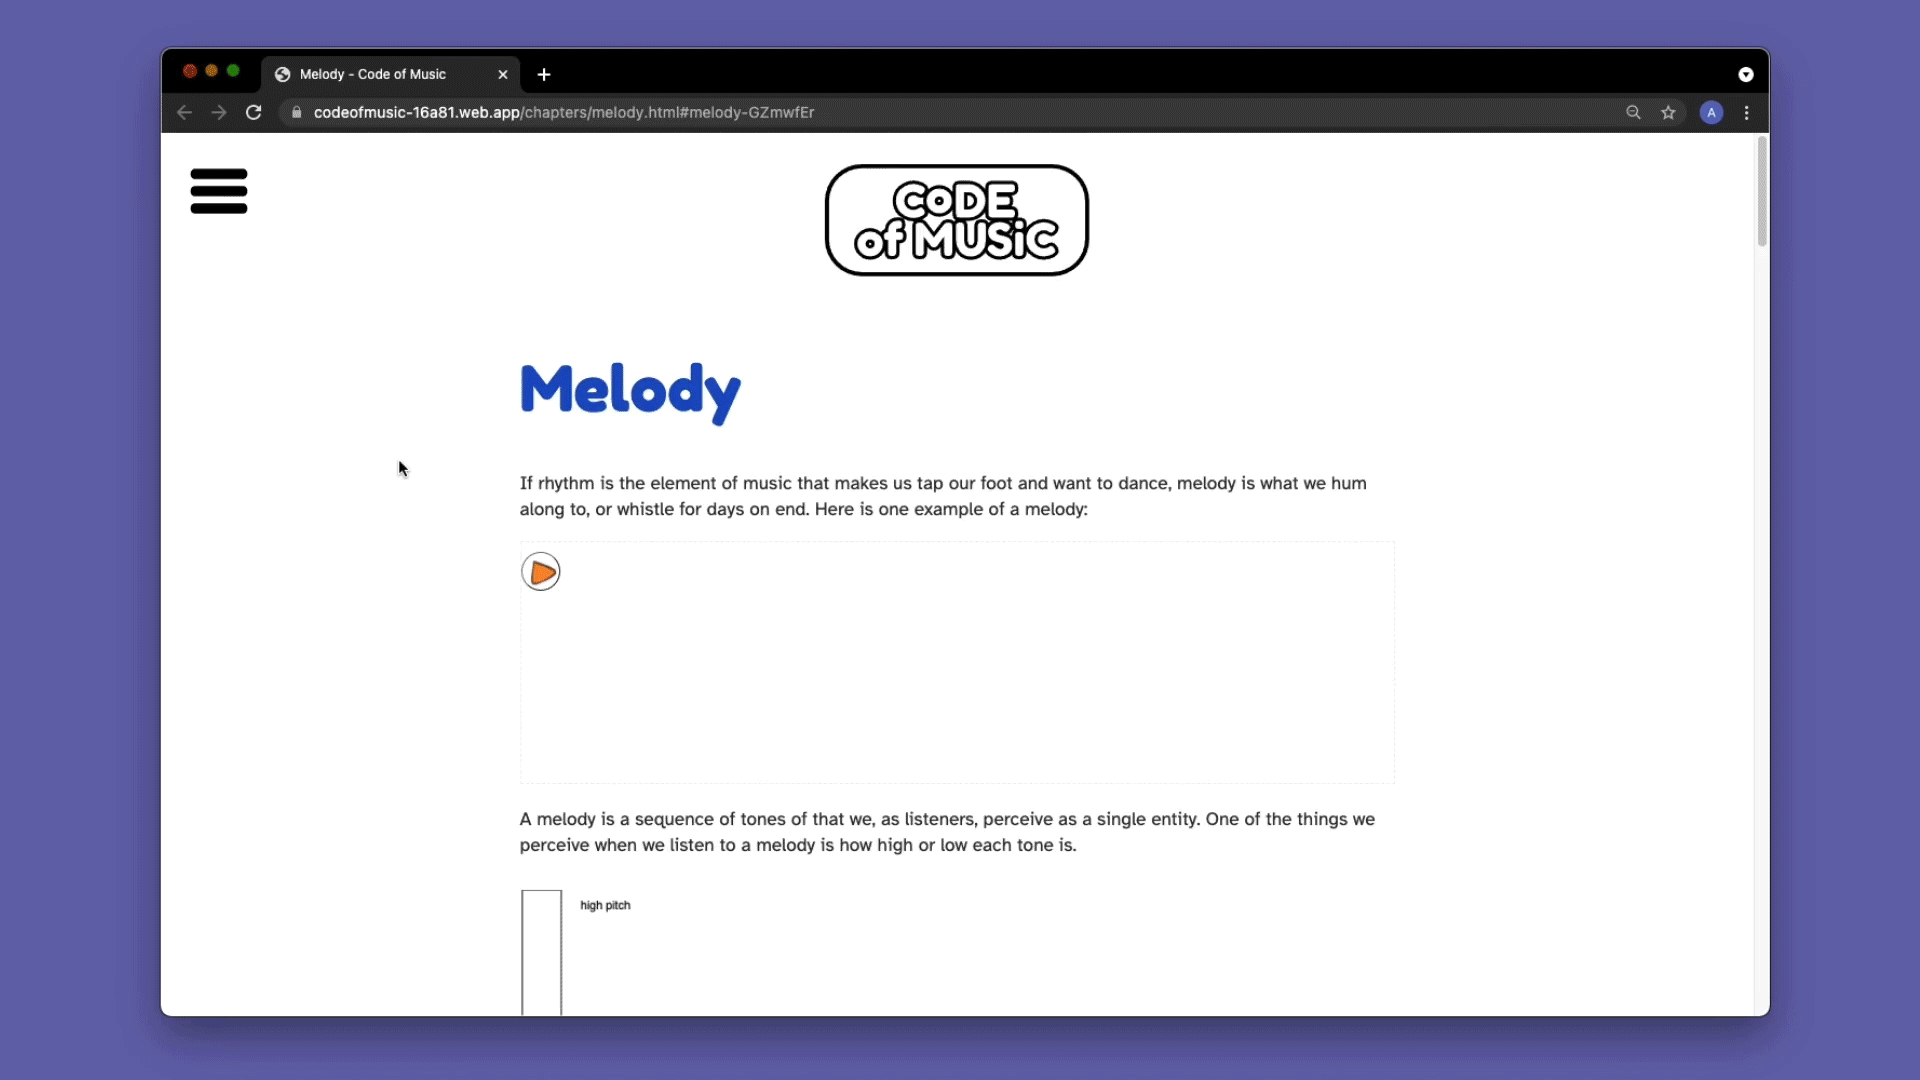 An animated GIF scrolls through the webpage “codeofmusic.com,” which shows animations of melody, and pitch and loudness, with accompanying text.